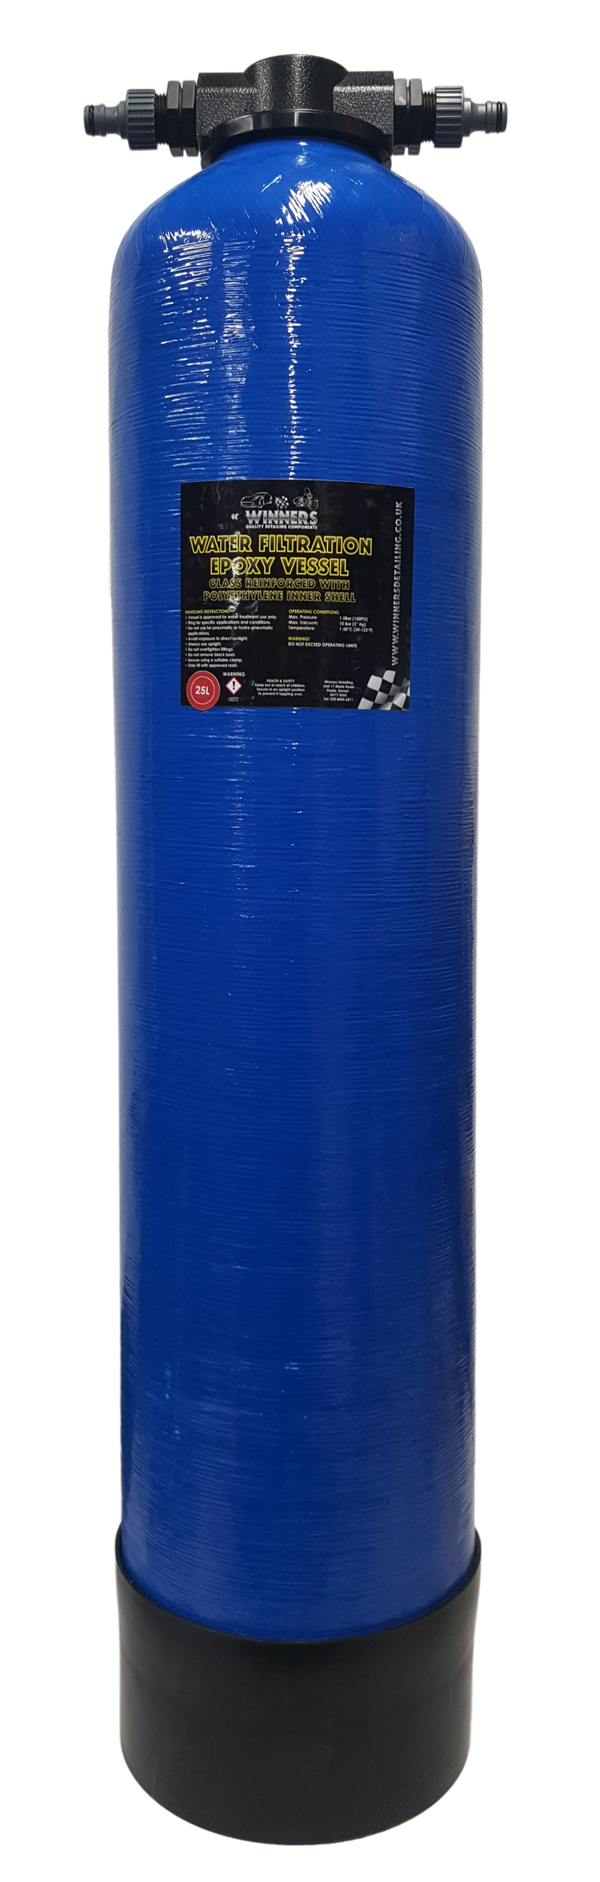 DI Water Filter Pressure Vessel 25 Litres with Hose Lock Fittings - High-Capacity Water Filter System for Cleaning